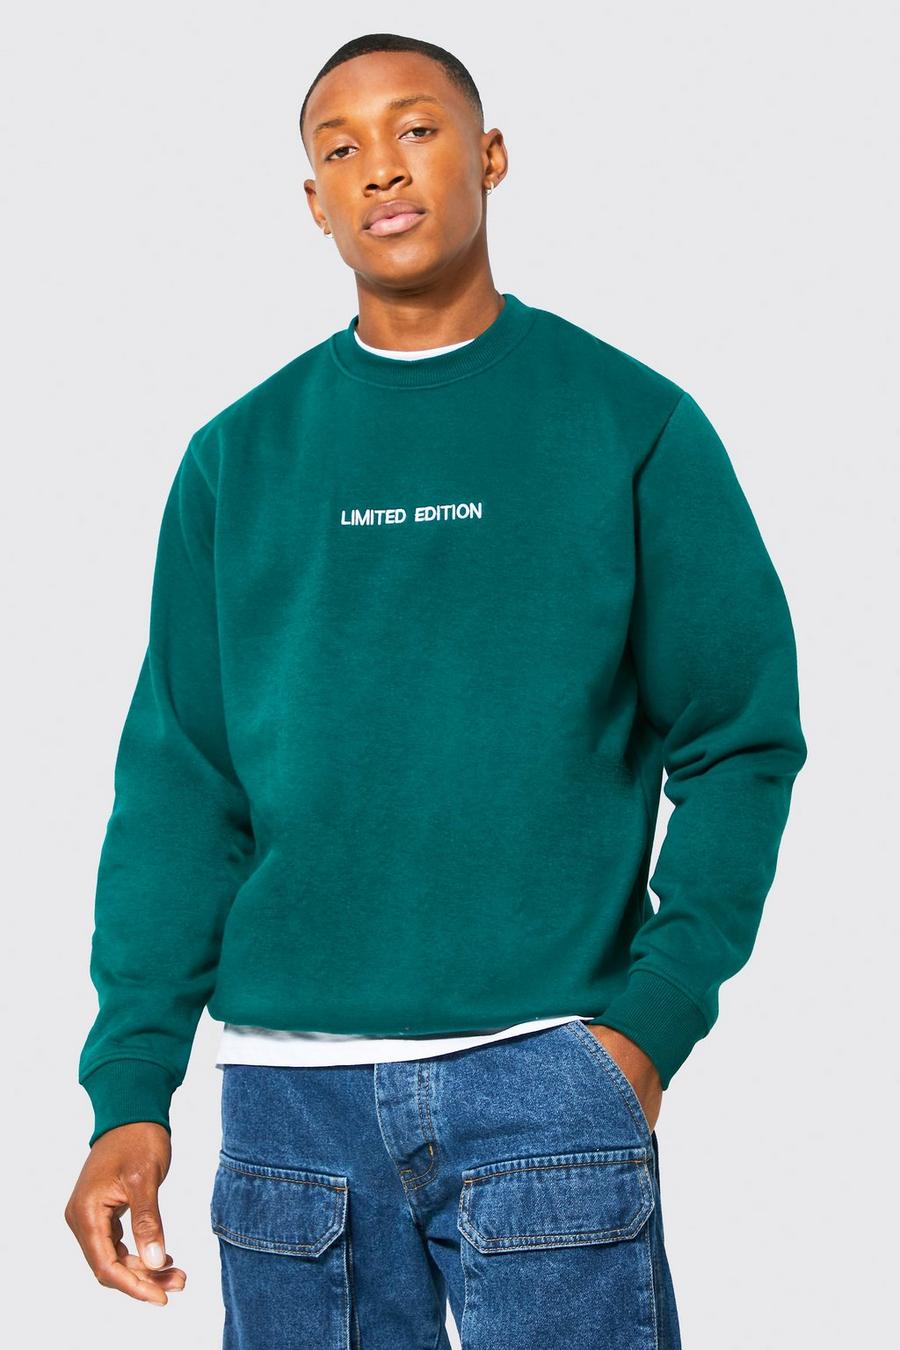 Forest Limited Crew Neck off Sweatshirt image number 1